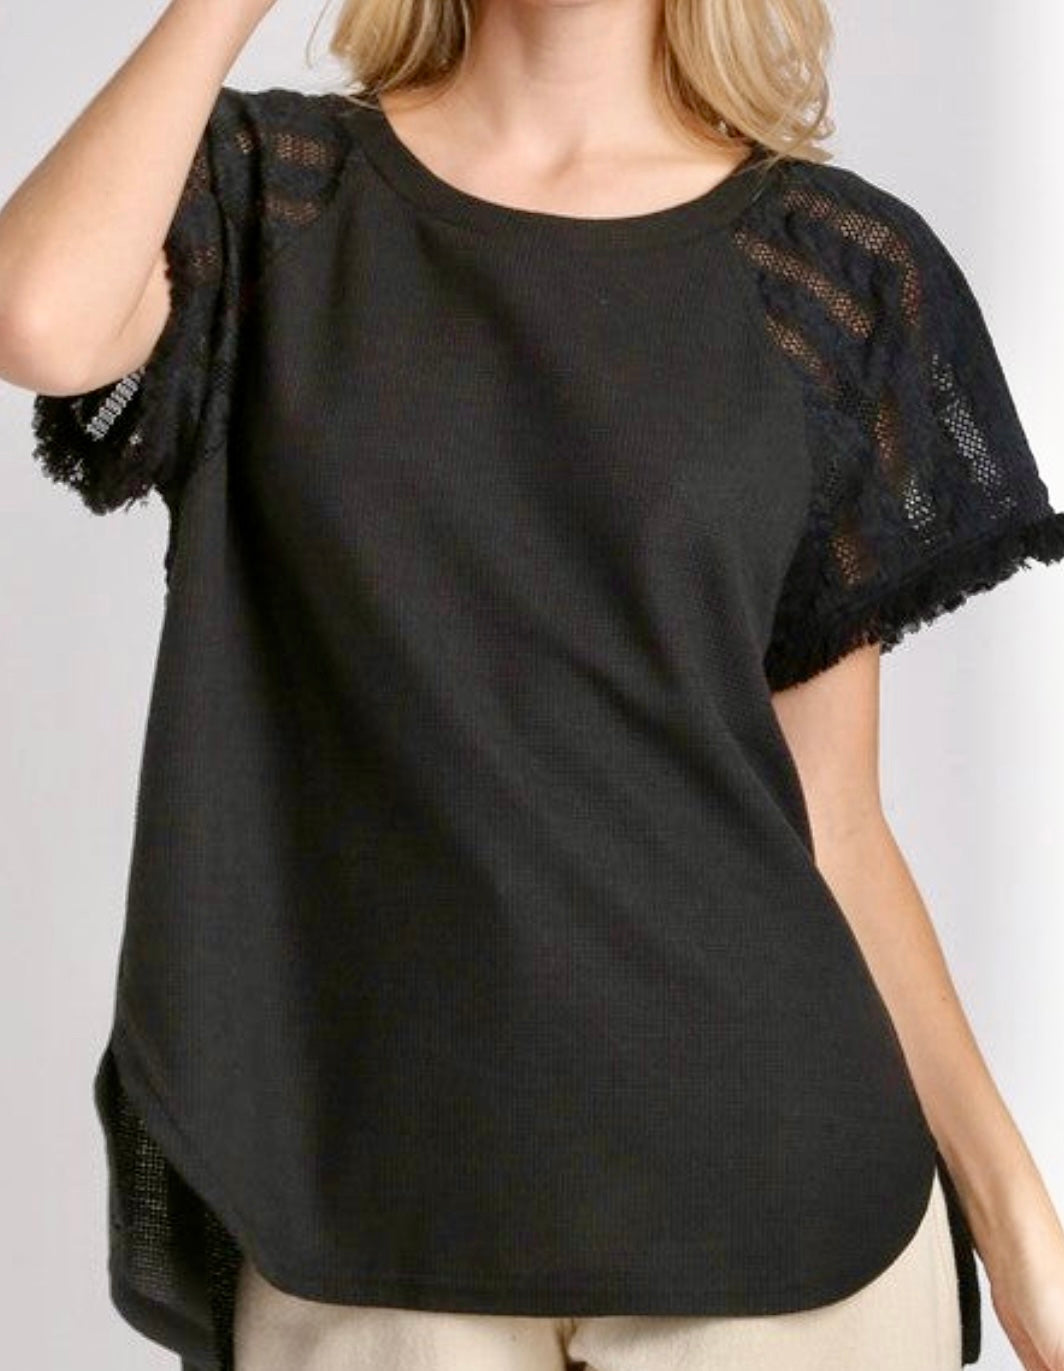 Black soft rib hi/lo top with crochet sleeve inserts & fray detail, BEST SELLER